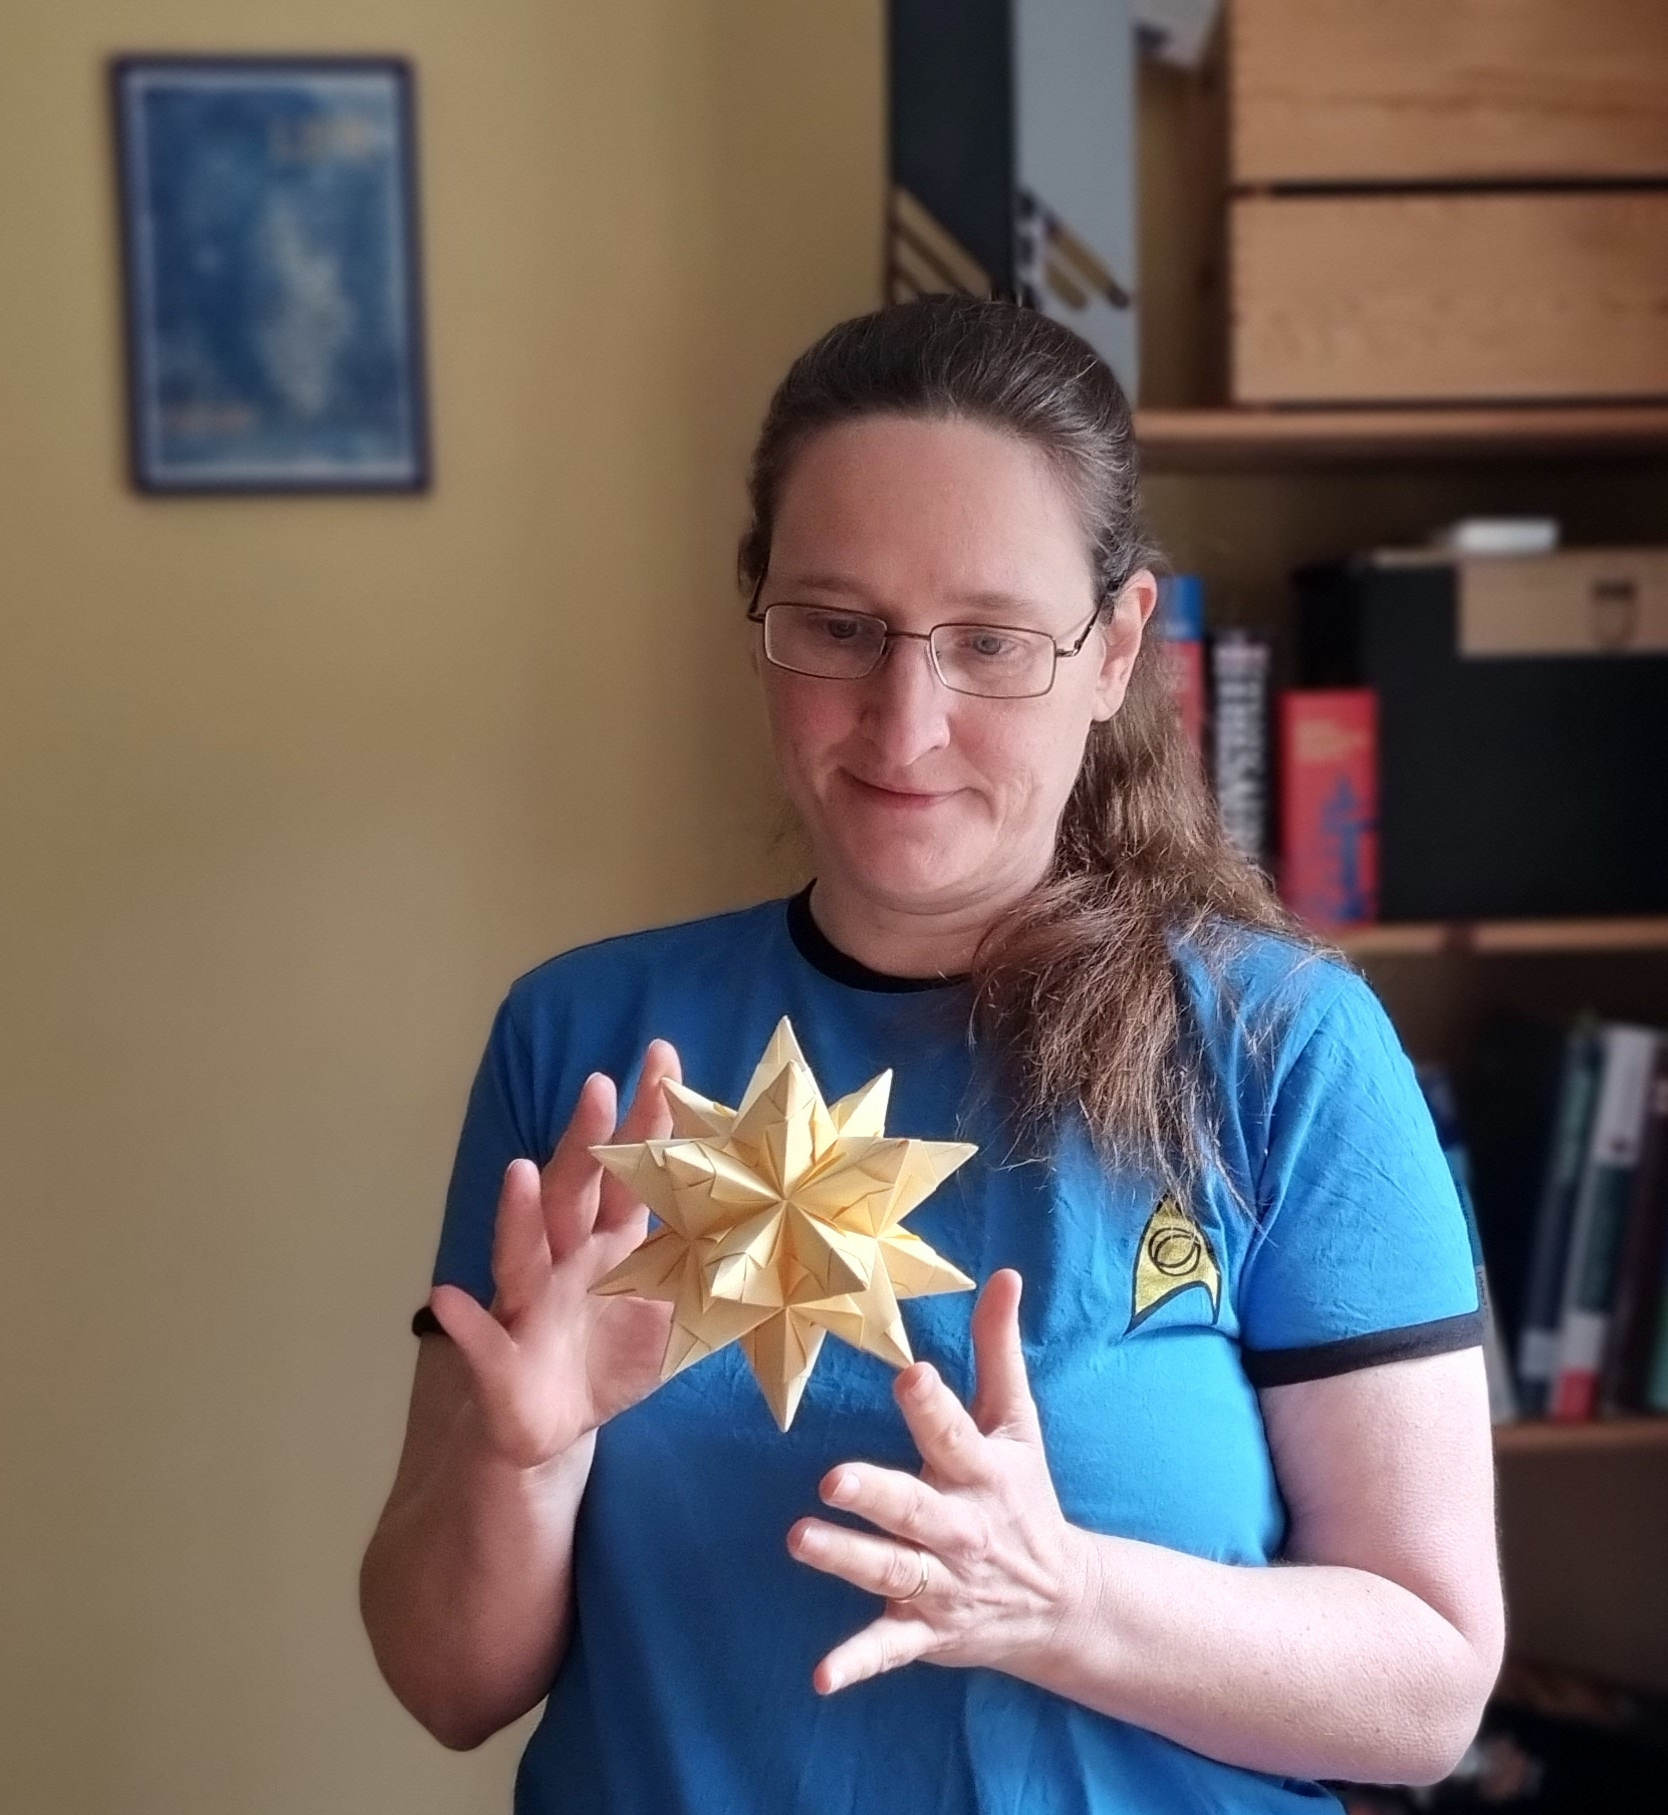 tutoring for school or university: a woman in a star trek fan shirt marvels at a three dimensional star made from yellow paper